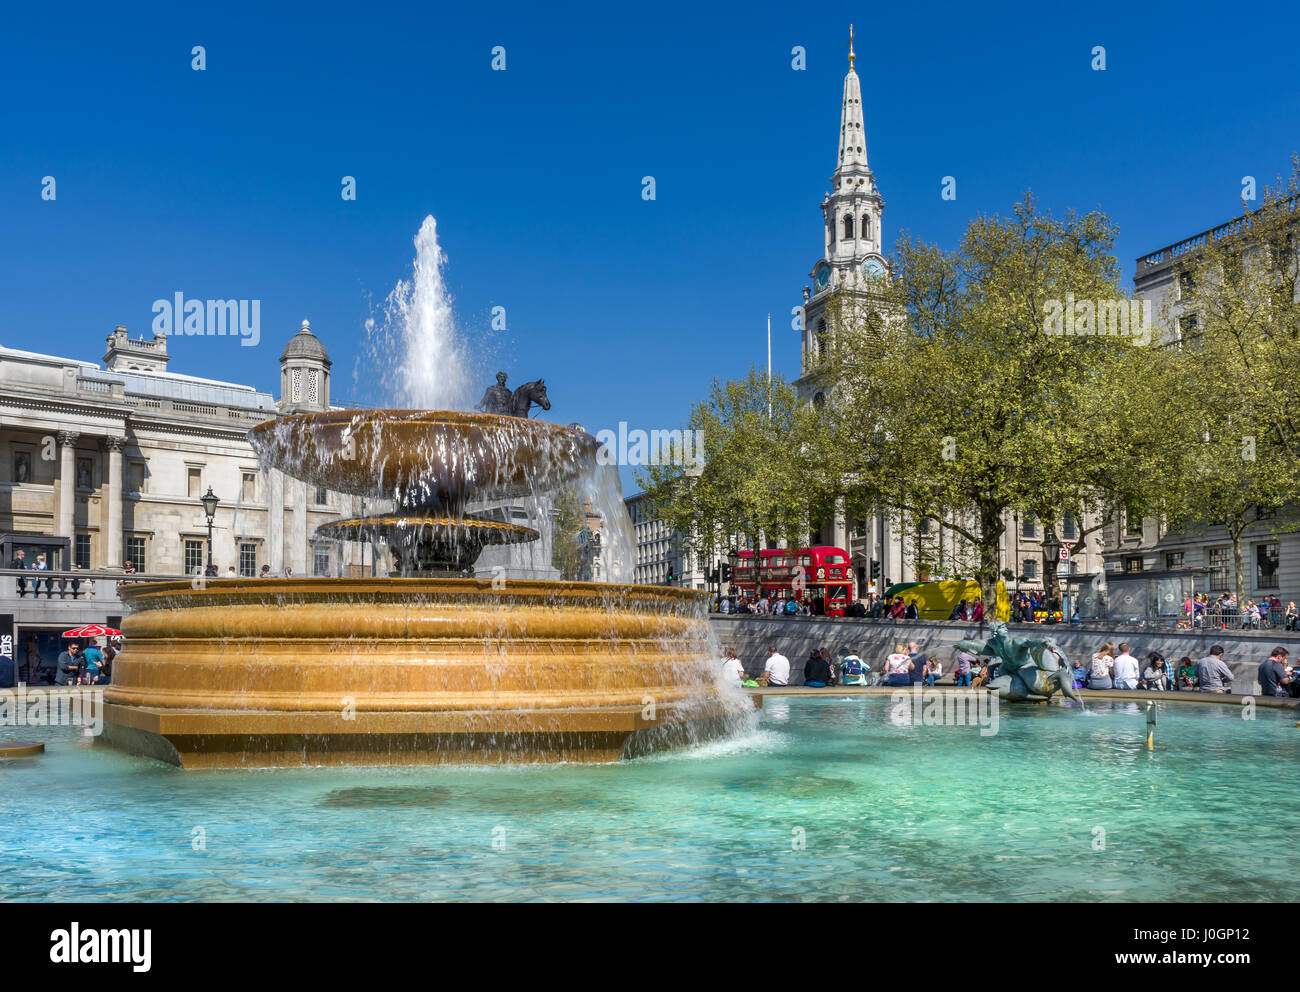 Trafalgar Square is a public square in the City of Westminster, Central London. It commemorates the Battle of Trafalgar that took place in 1805. Stock Photo